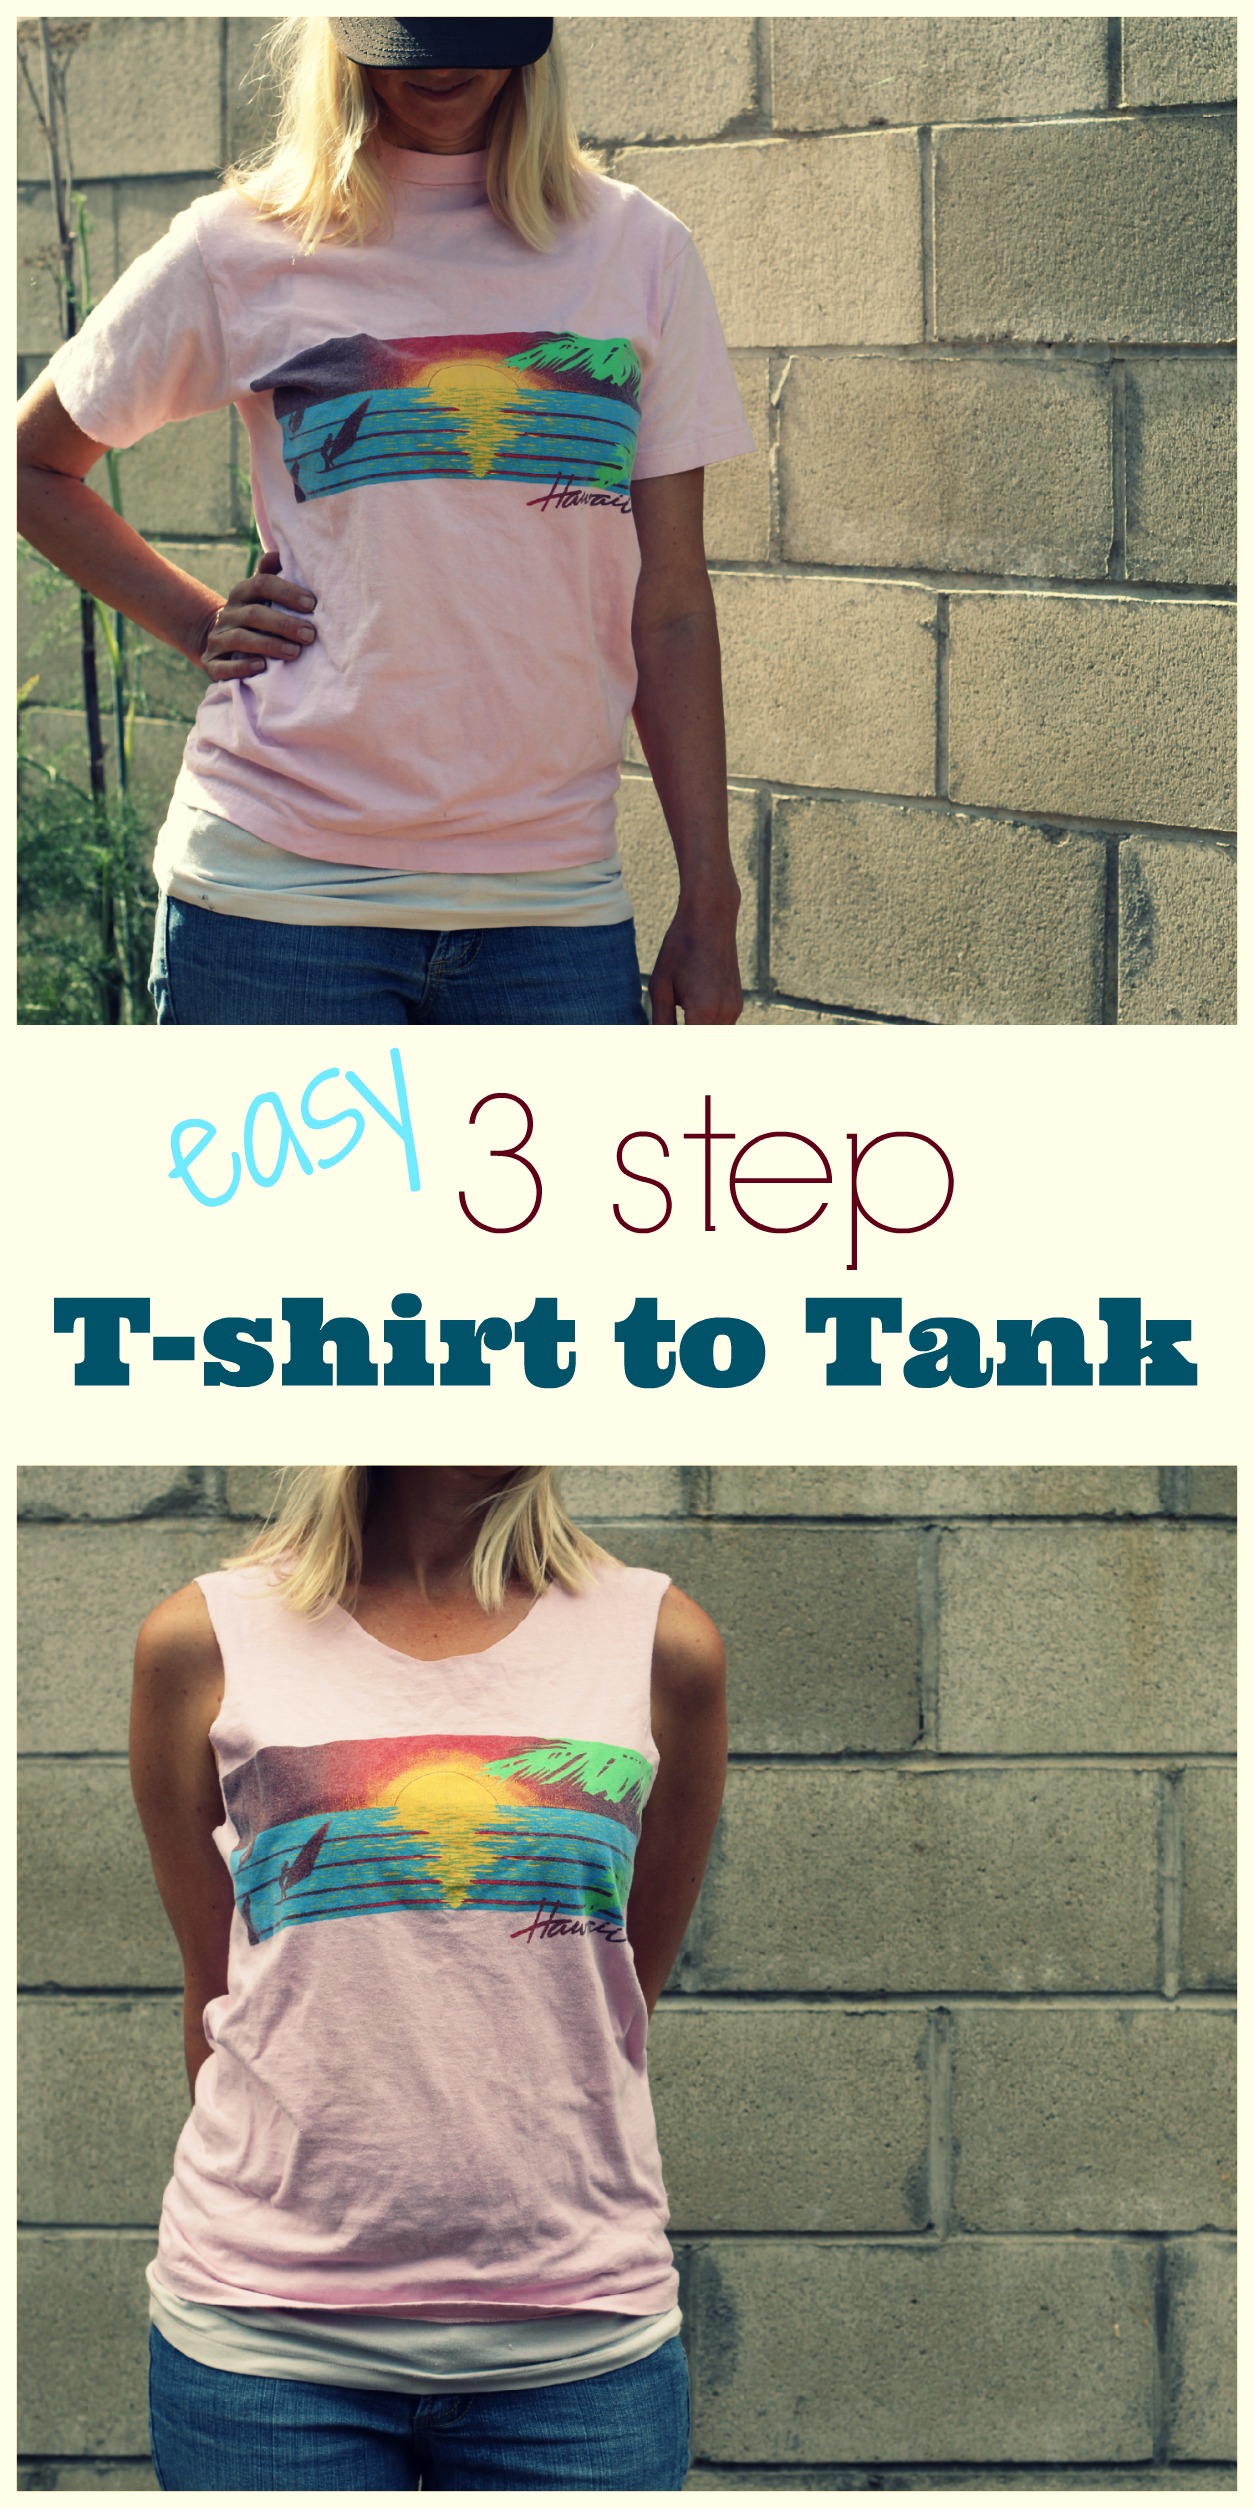 How To Cut Band Shirts Into Tank Tops?